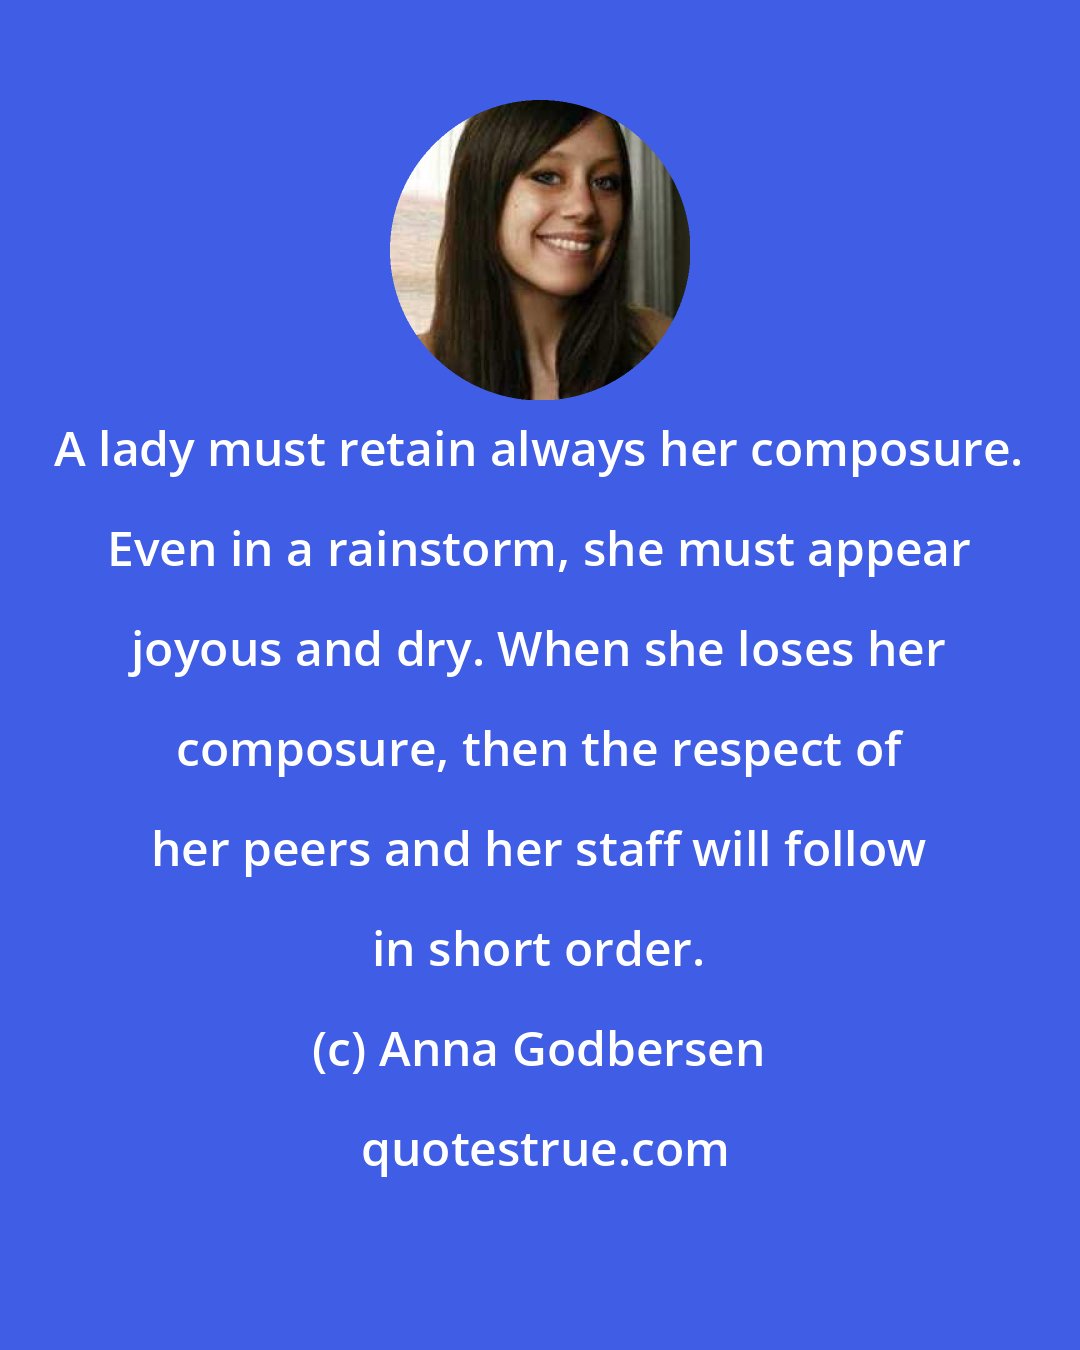 Anna Godbersen: A lady must retain always her composure. Even in a rainstorm, she must appear joyous and dry. When she loses her composure, then the respect of her peers and her staff will follow in short order.